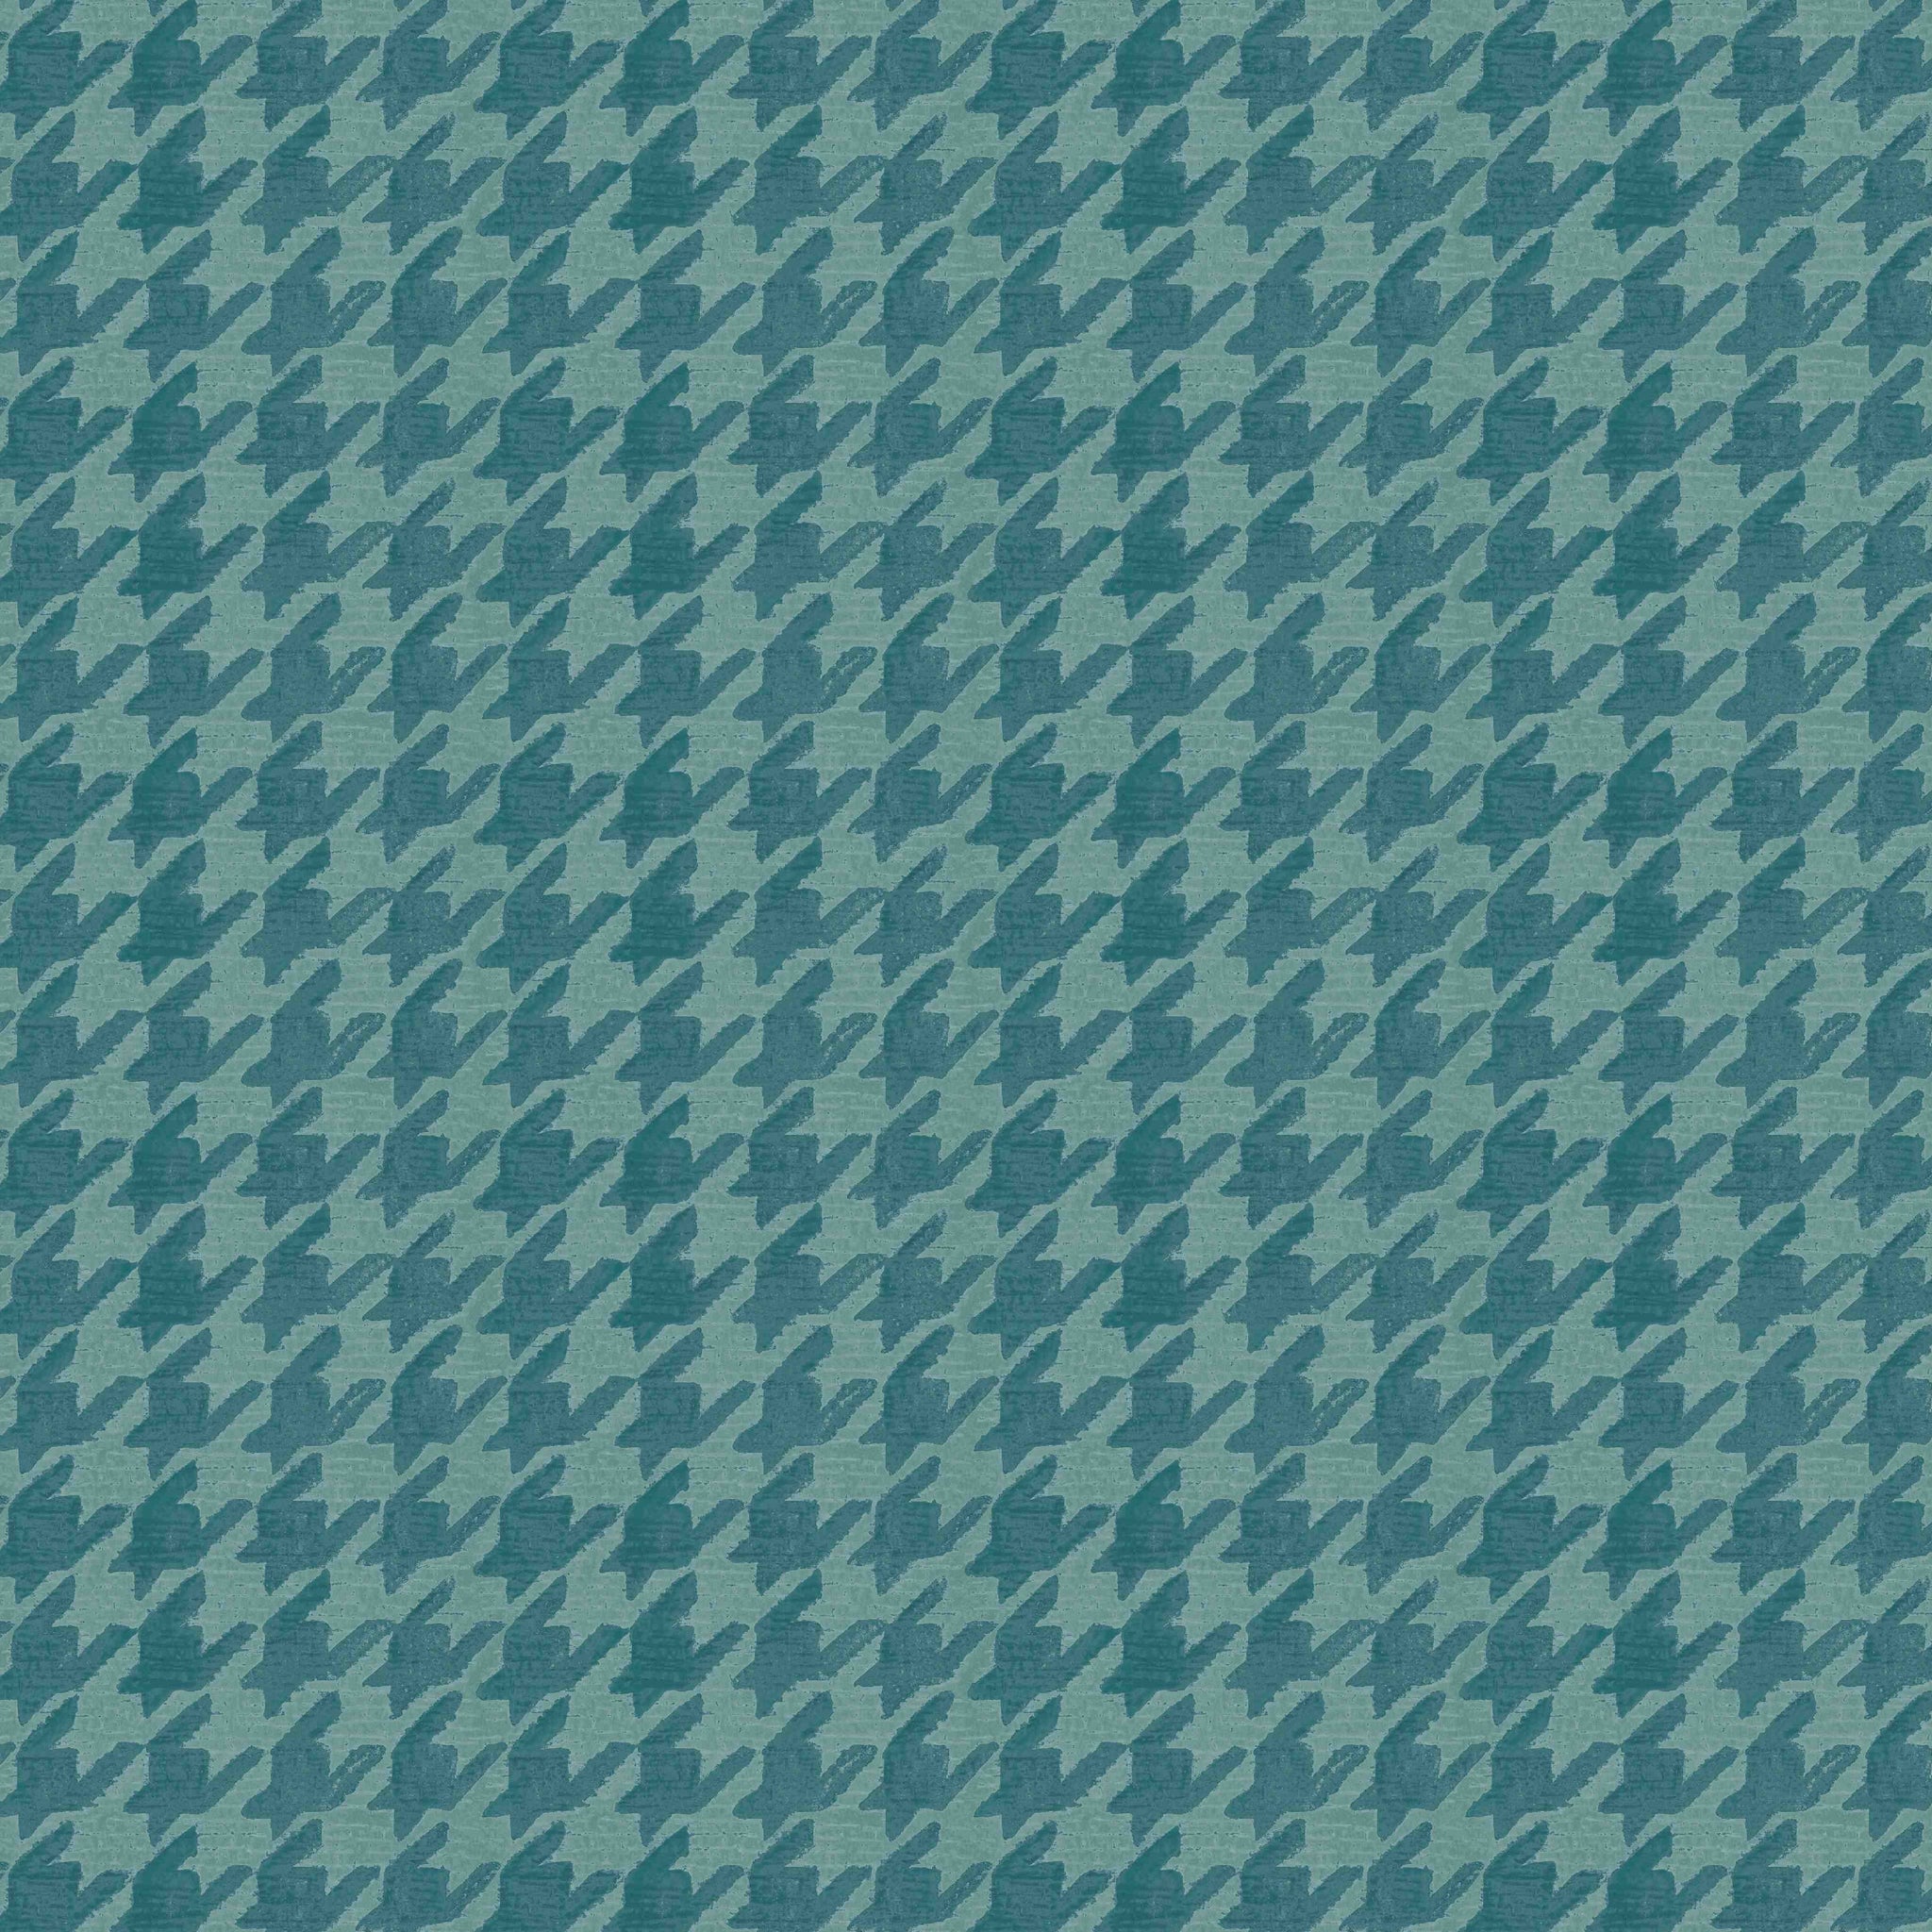 Hounds Tooth - Teal 65